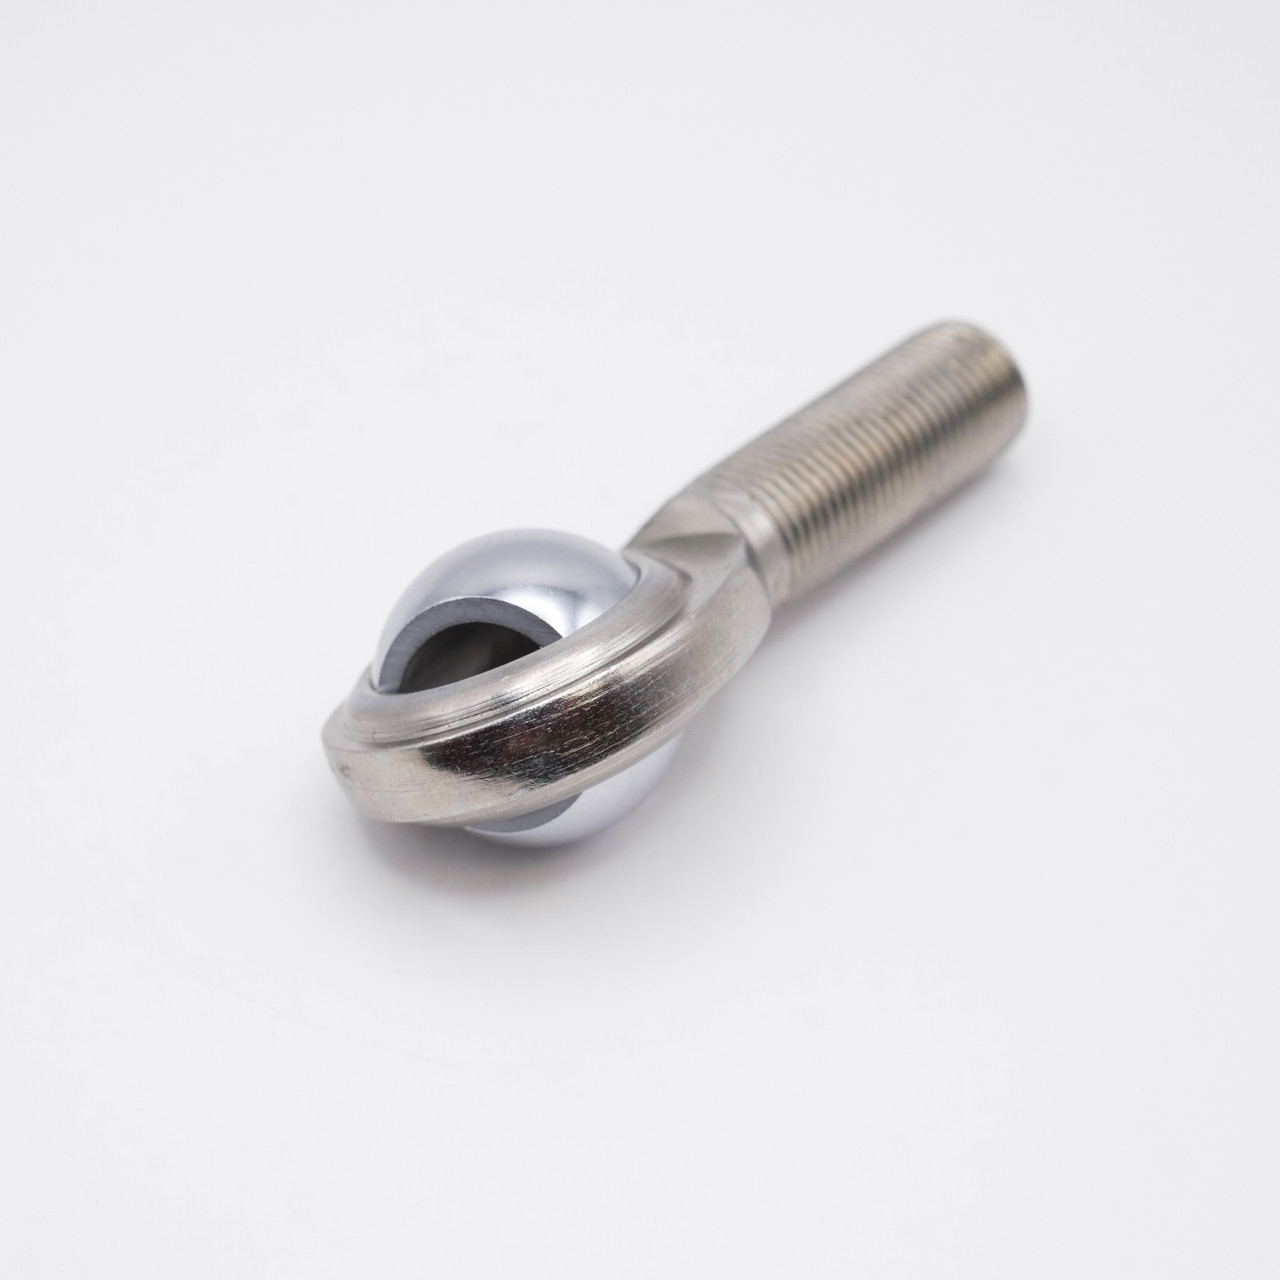 VCM-8 Male Rod-End Bearing Right Hand 1/2" Bore Top View